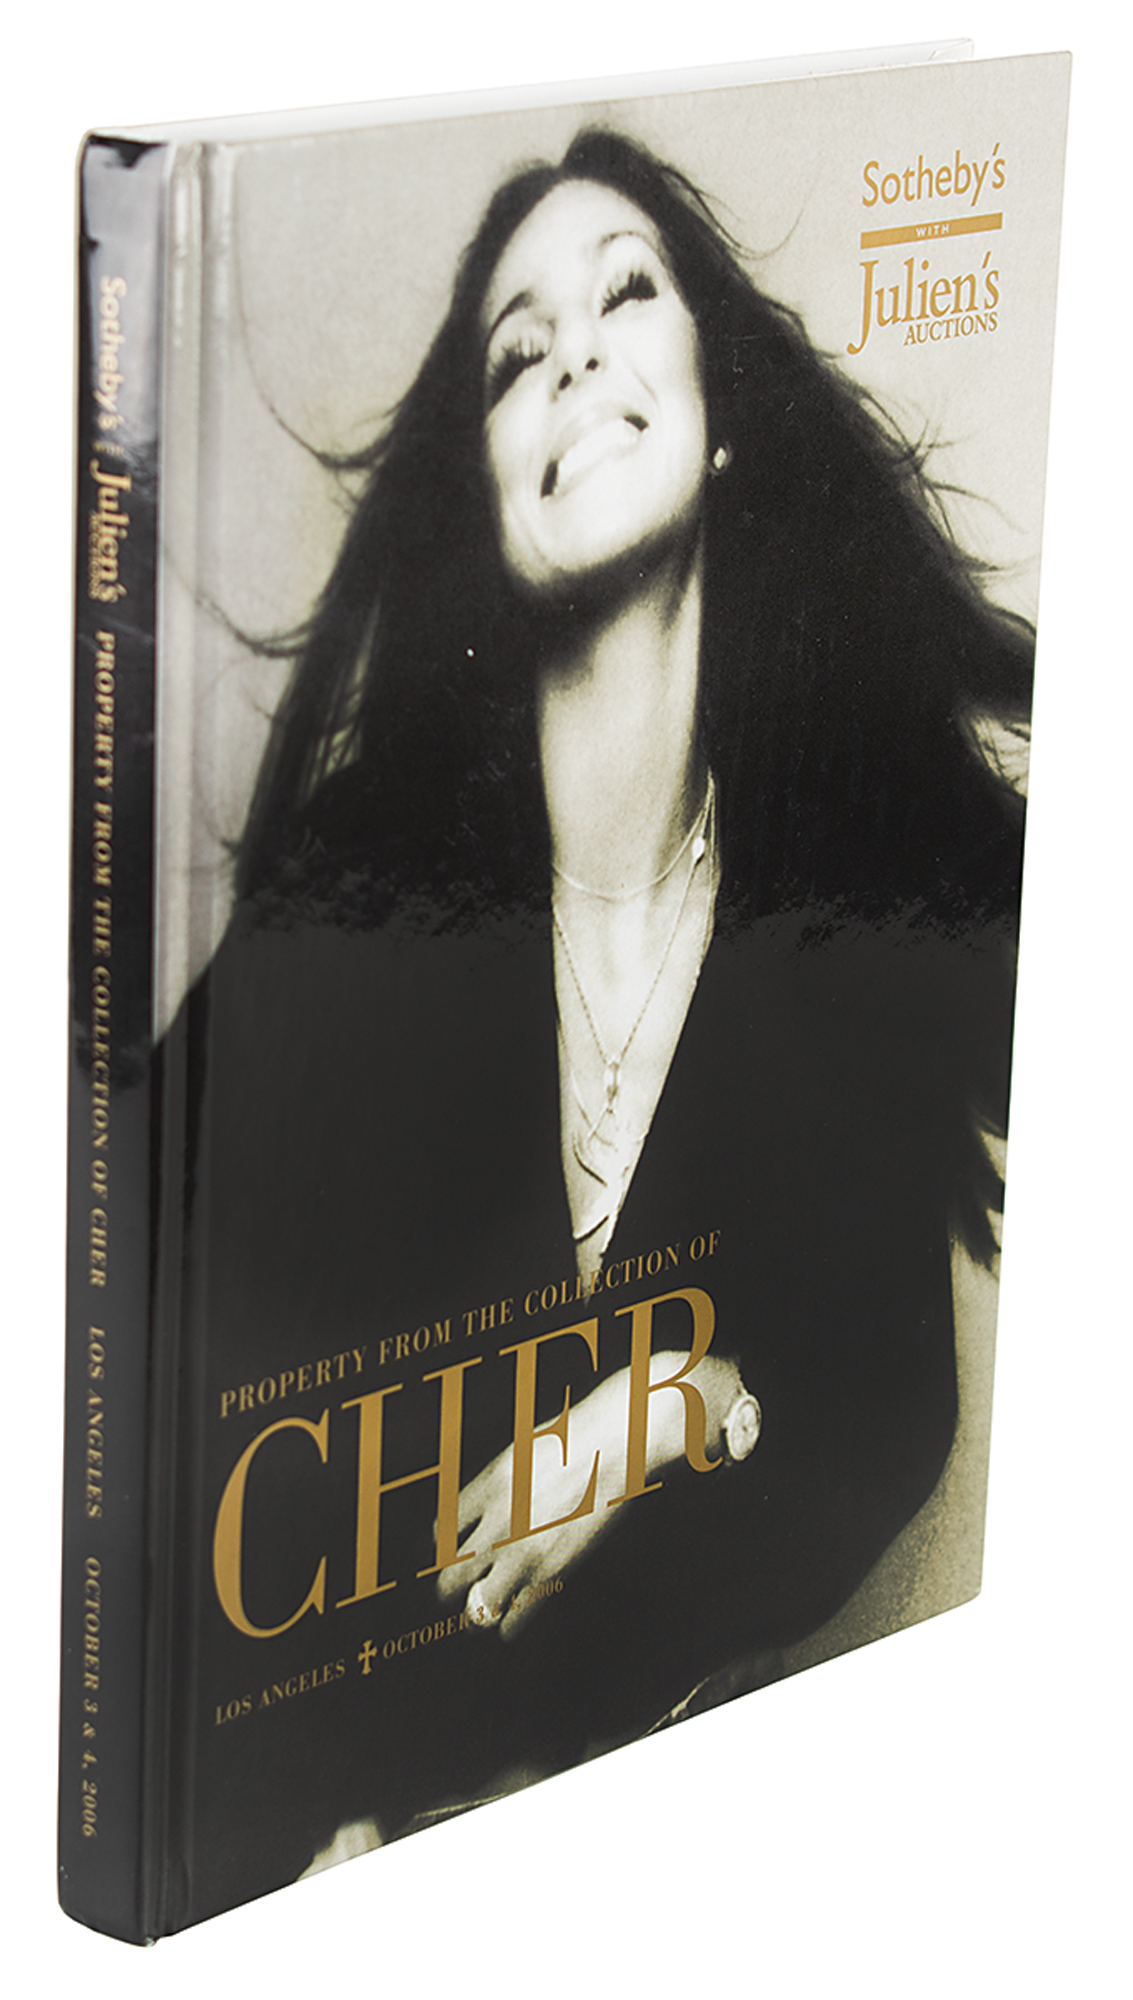 Lot #892 Cher Signed Book - Image 3